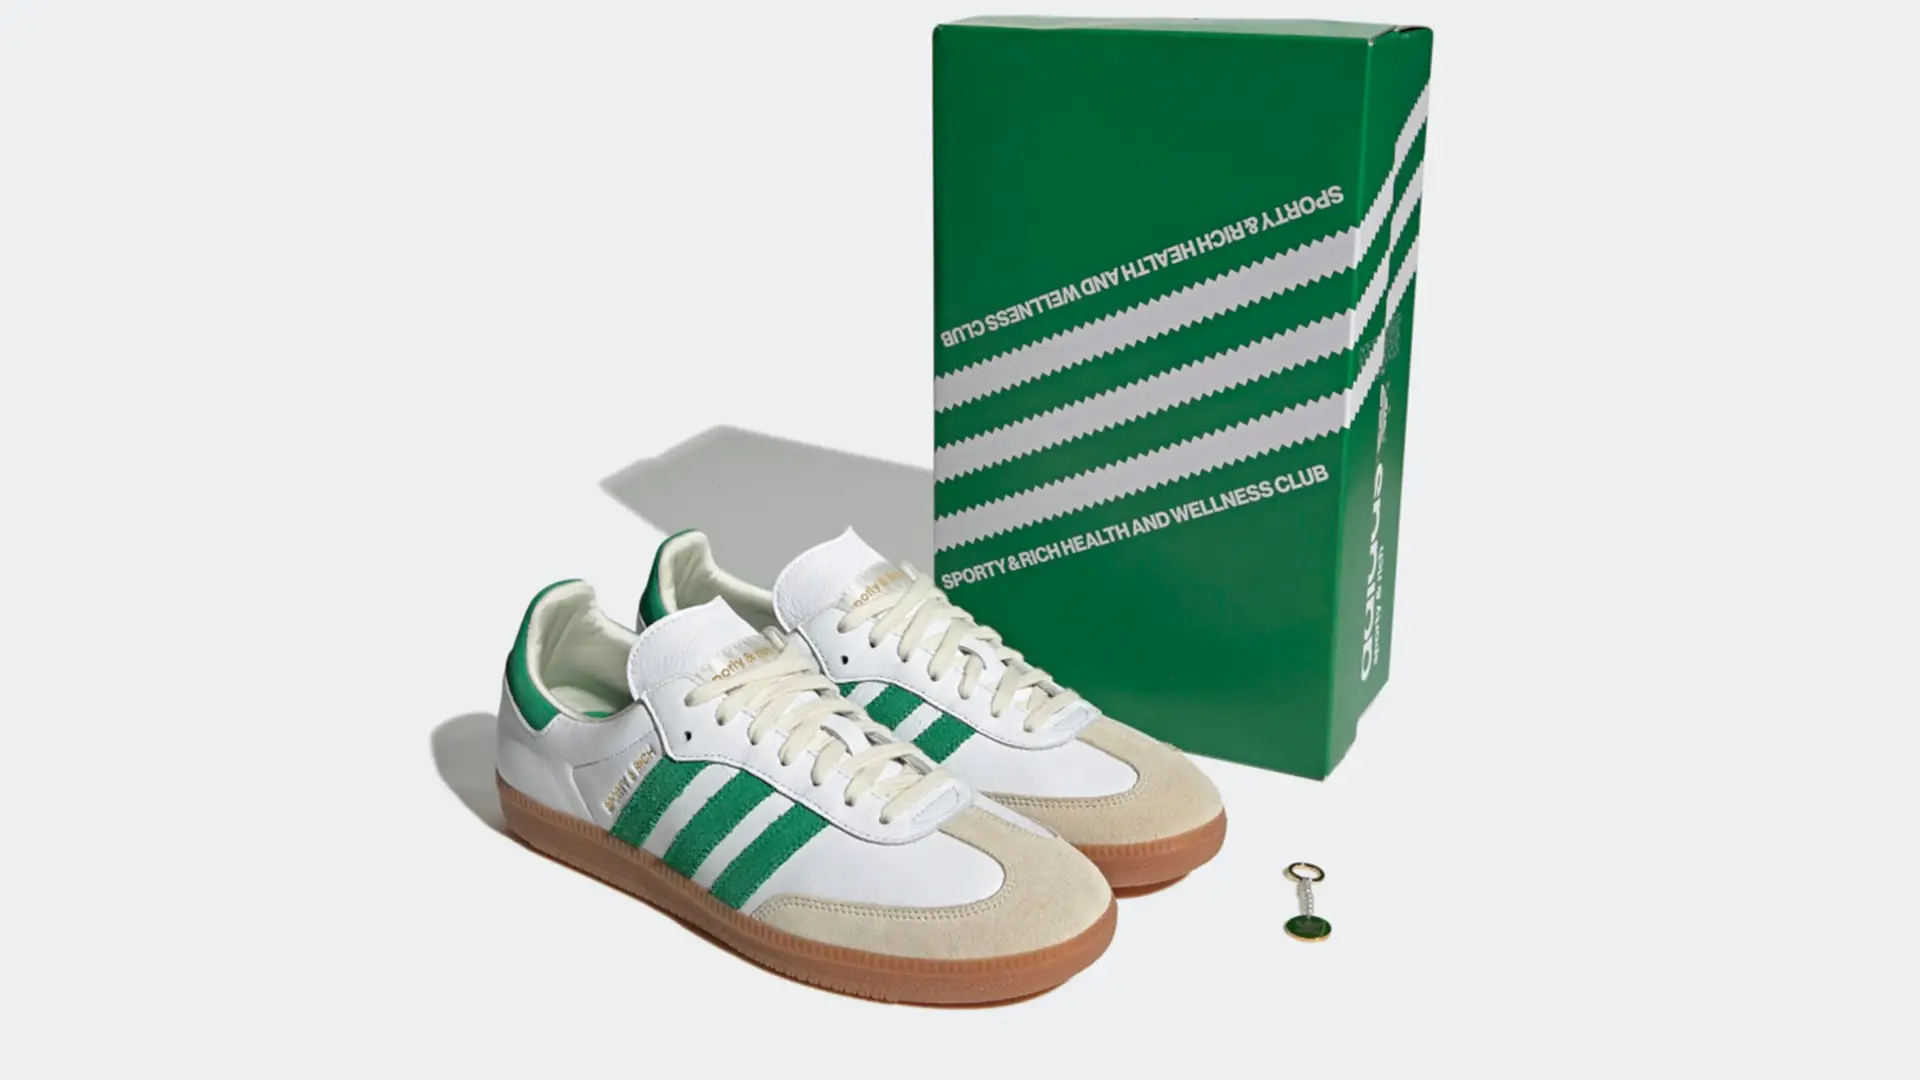 Here’s Where to Get Your Hands On the special Adidas Fortarun EL K x special adidas Collection